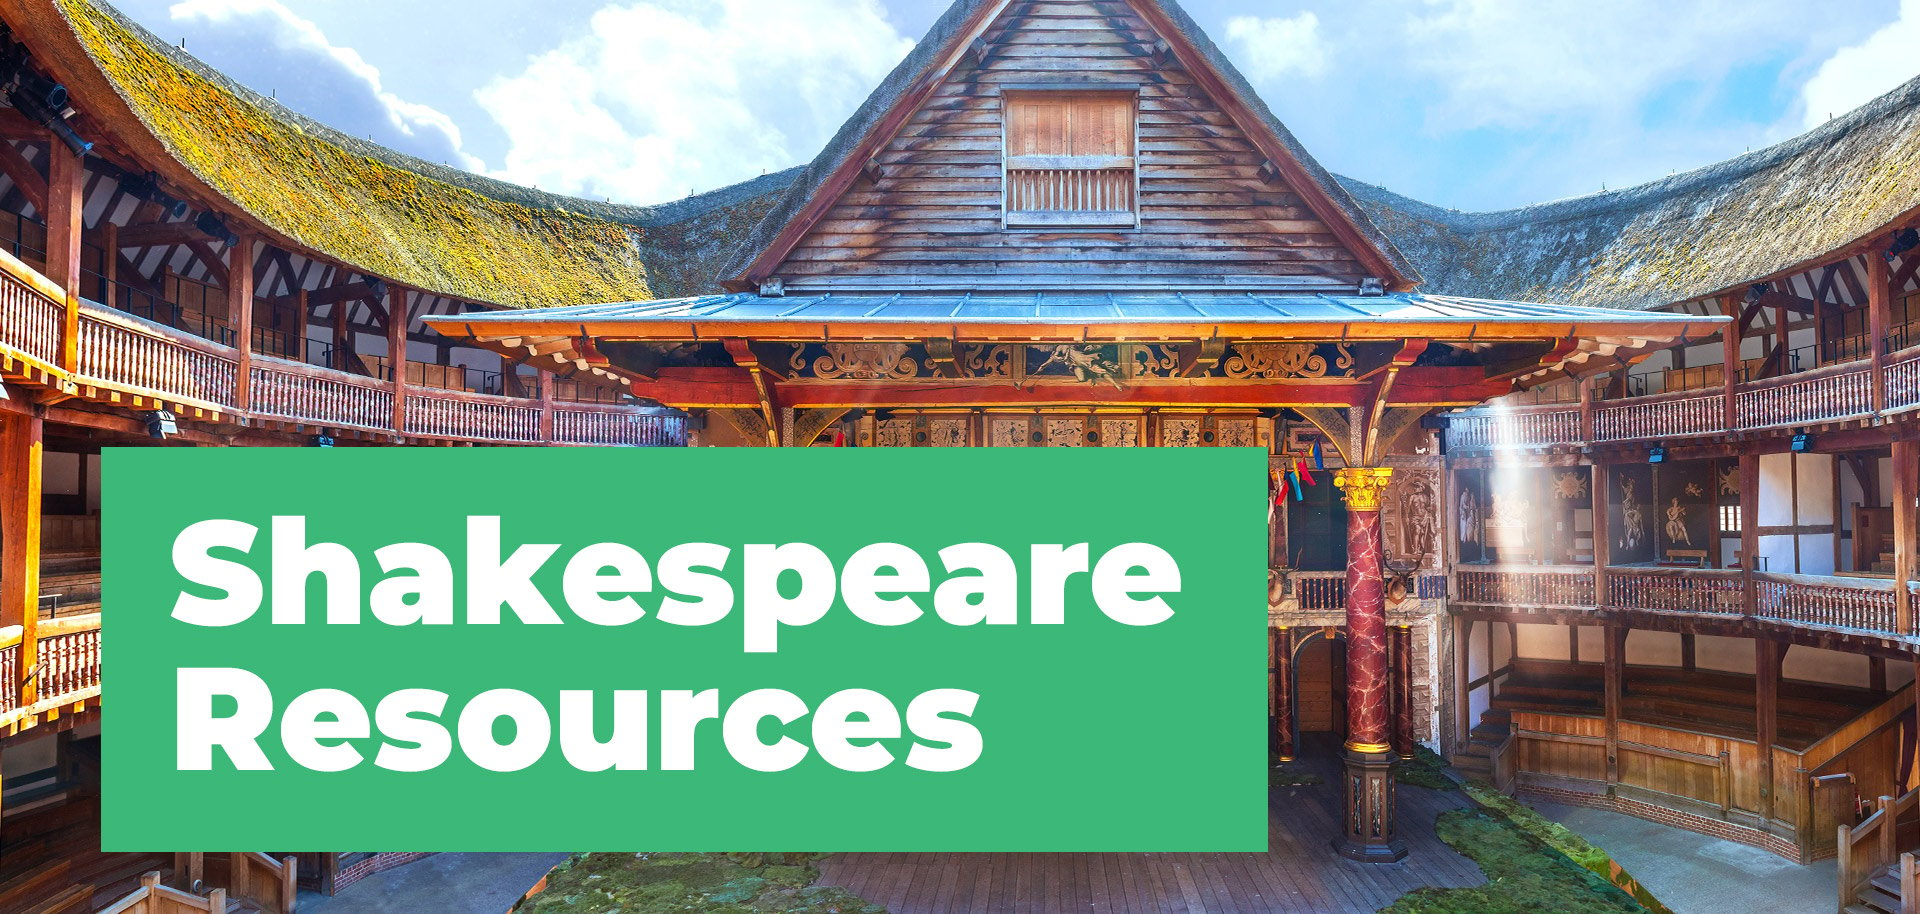 Shakespeare Resources